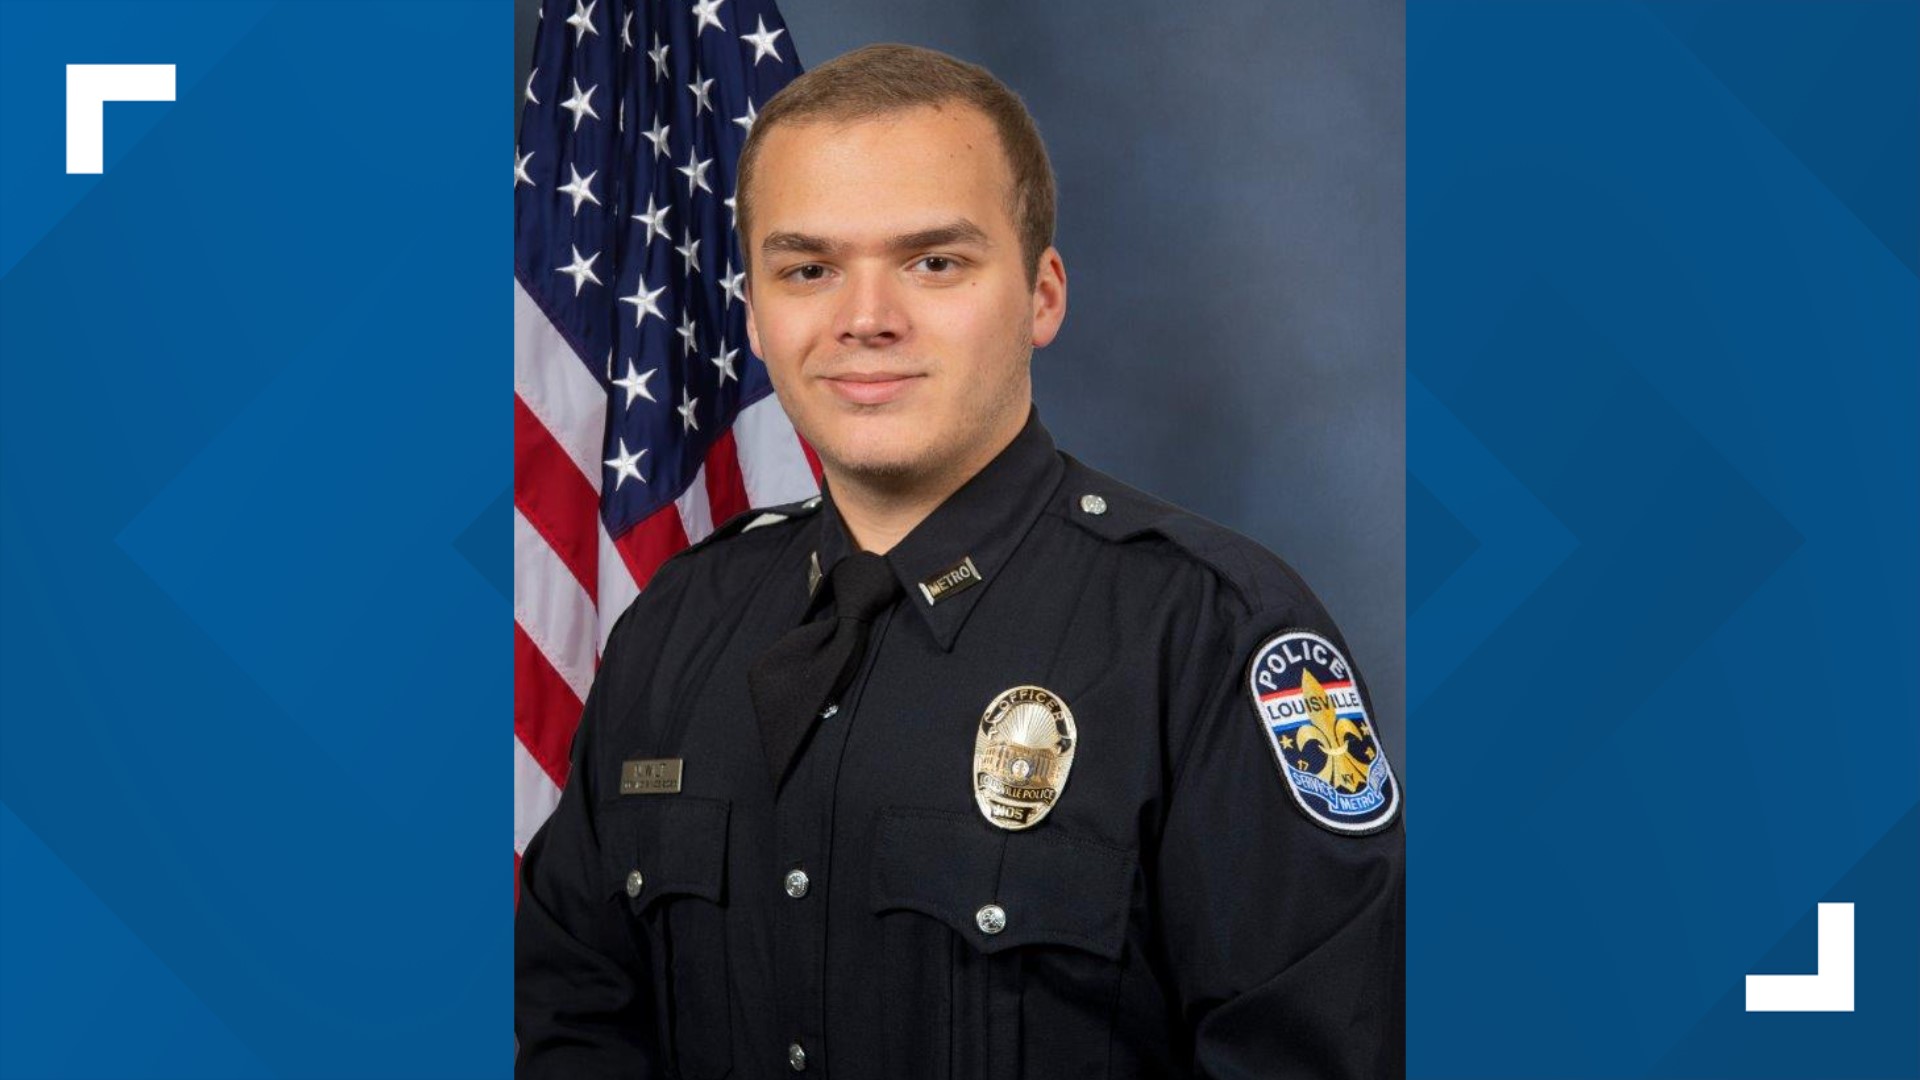 After suffering a critical brain injury, LMPD Ofc. Nickolas Wilt is making "remarkable" progress and is currently being transferred to rehab.